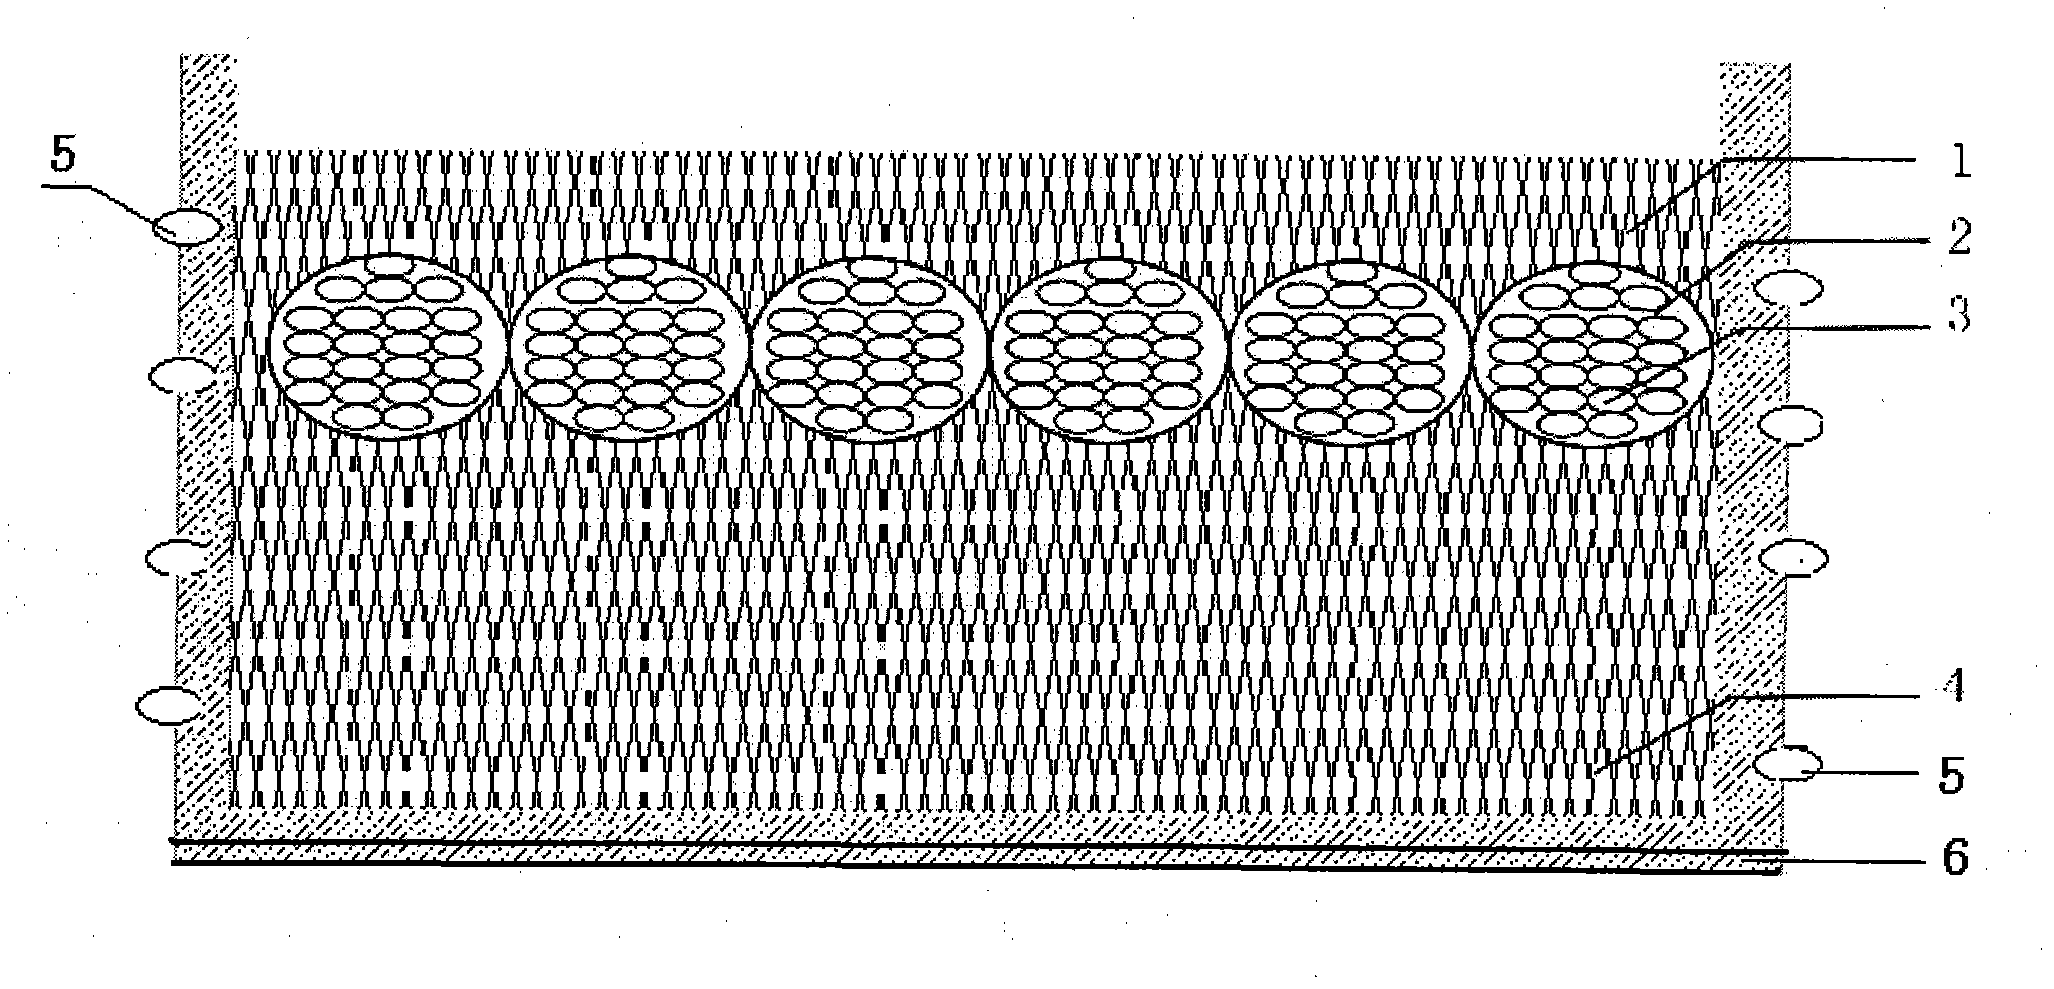 Artificial hatch method of eggs of snake